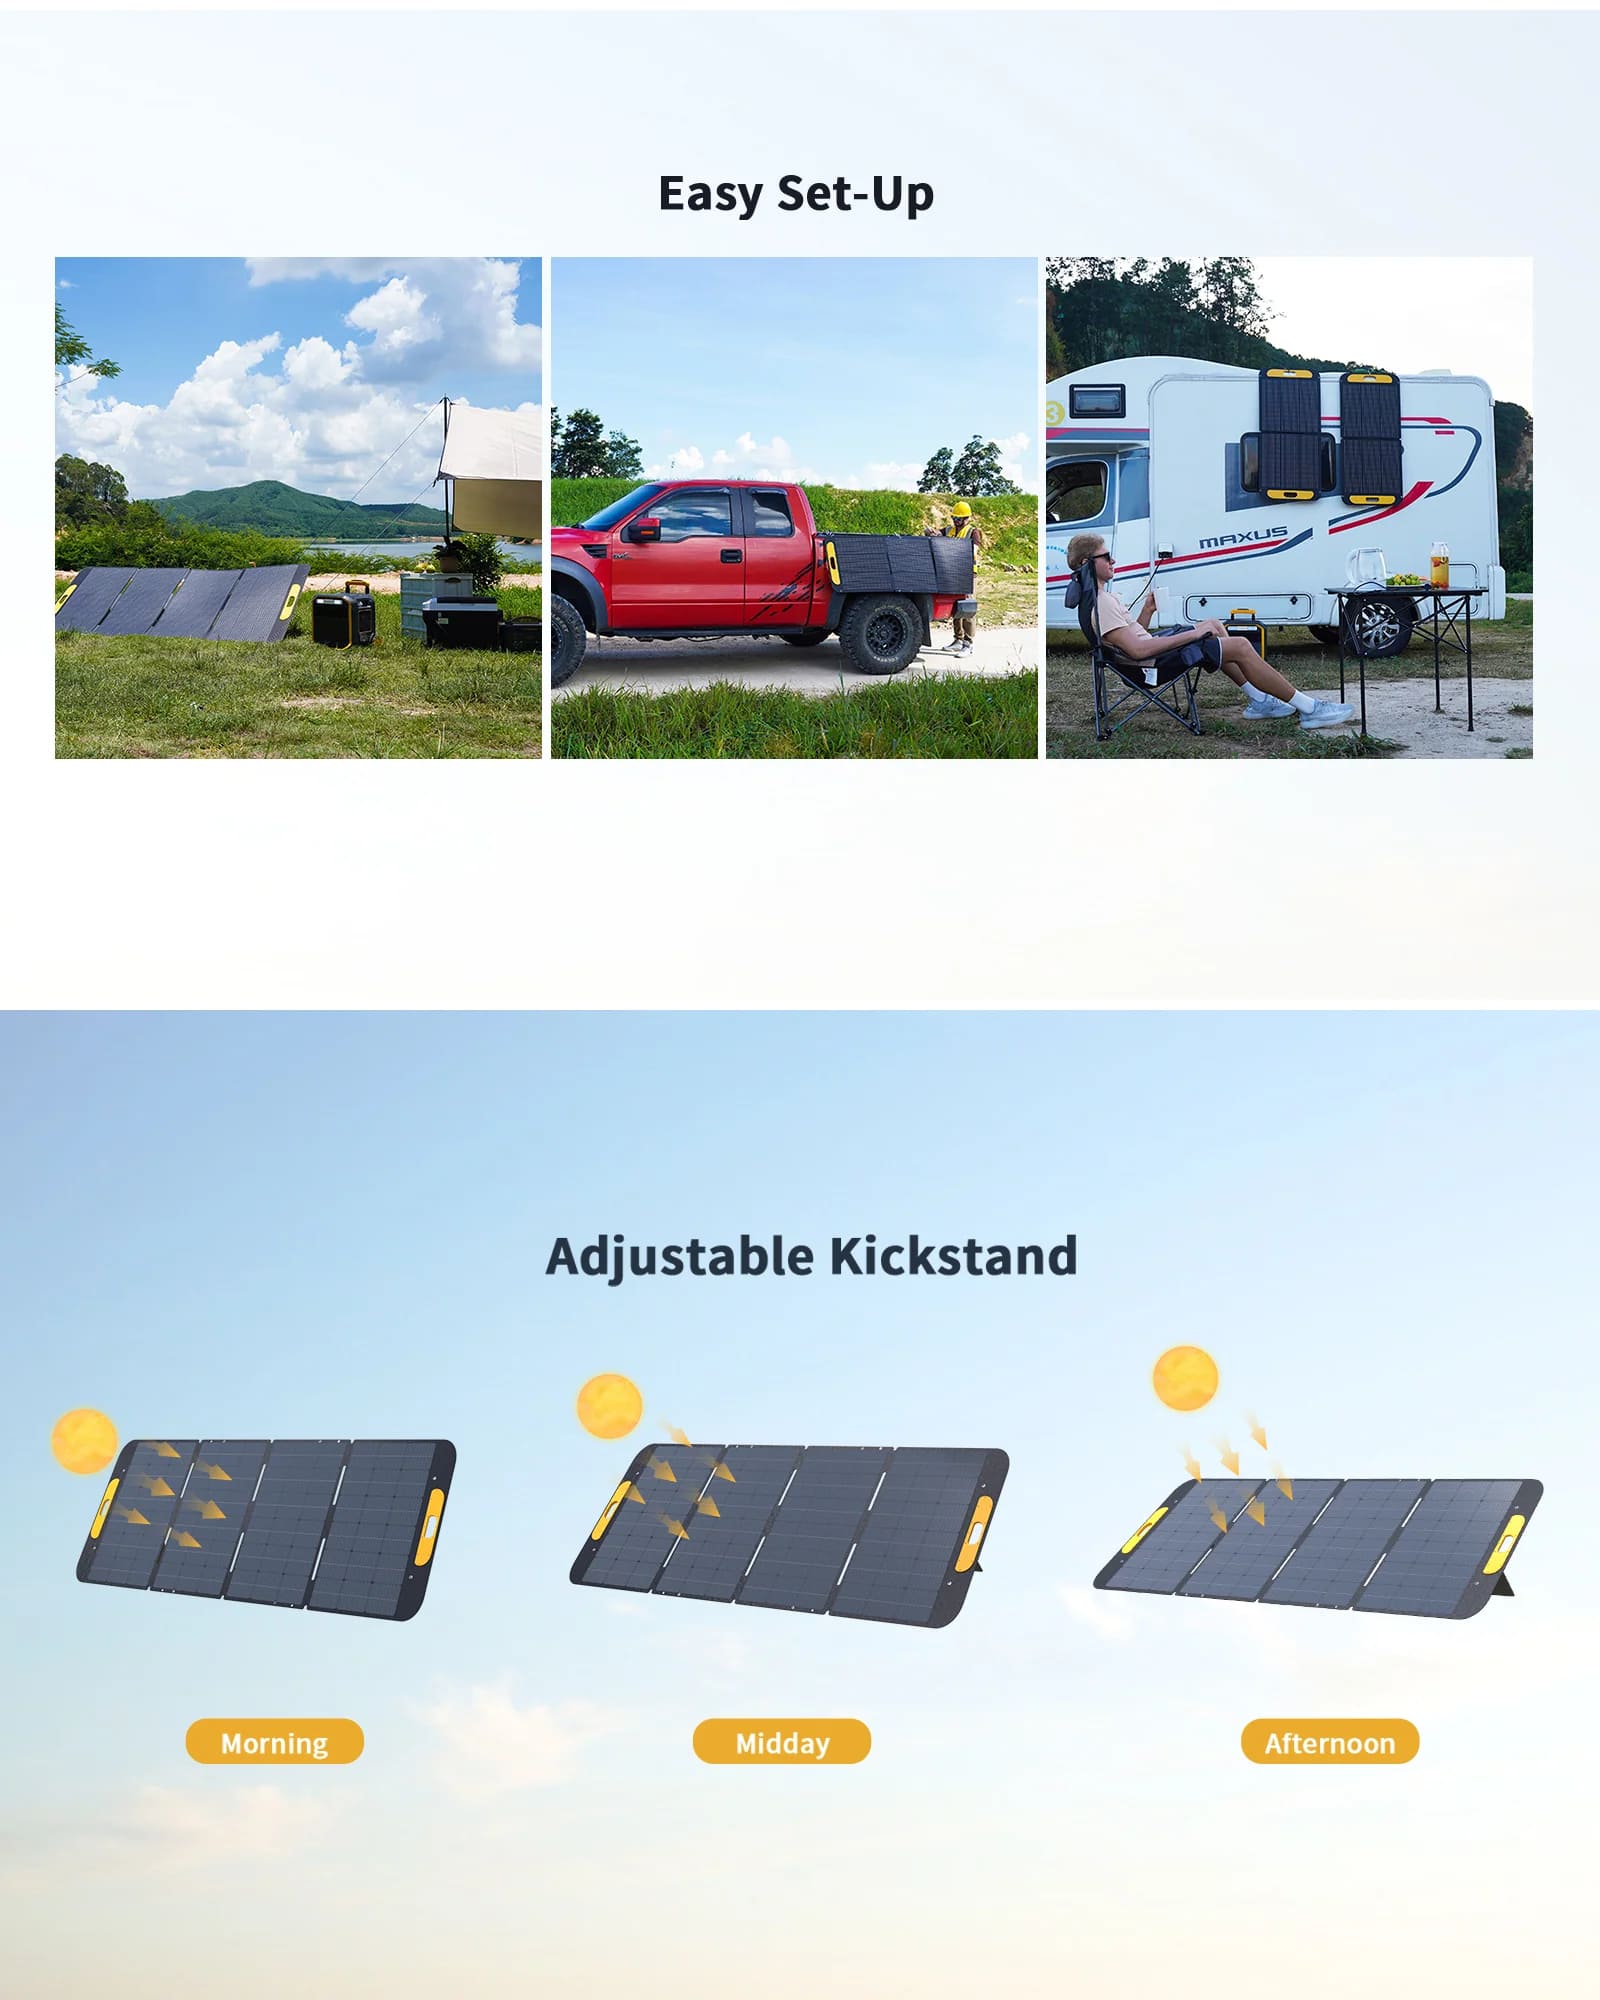 Vtoman VS400 Pro solar panel comes with 3 adjustable kickstands for quick set up on the ground